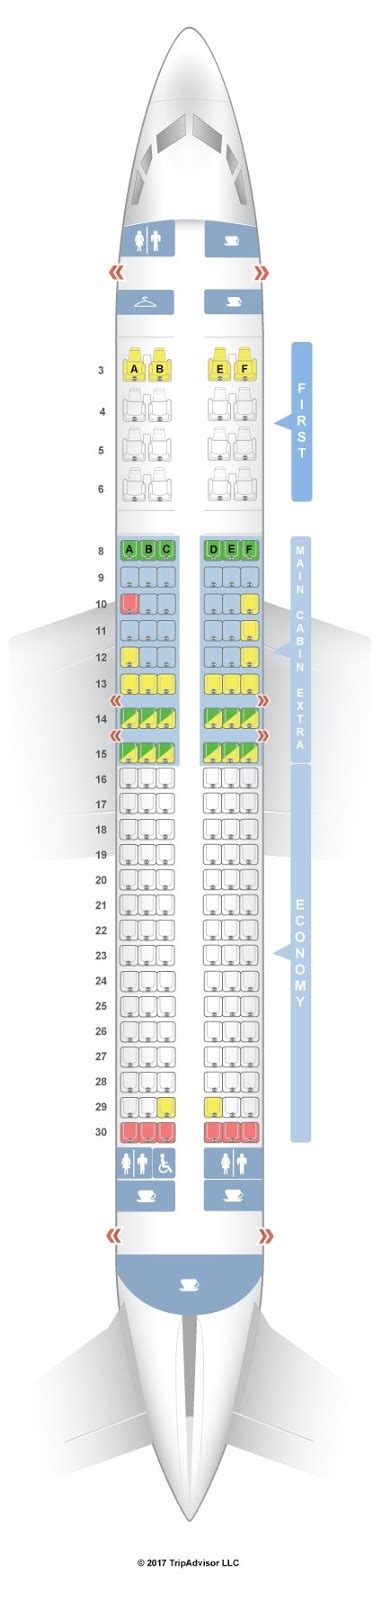 Detailed seat map American Airlines Boeing B737 MAX. Find the best airplanes seats, information on legroom, recline and in-flight entertainment using our detailed online seating charts. ... Will never fly a 737 Max, deadly planes. 2 found this review helpful. ... Boeing B737 800; Boeing B737 800 config.2; Boeing B737 MAX; …. 